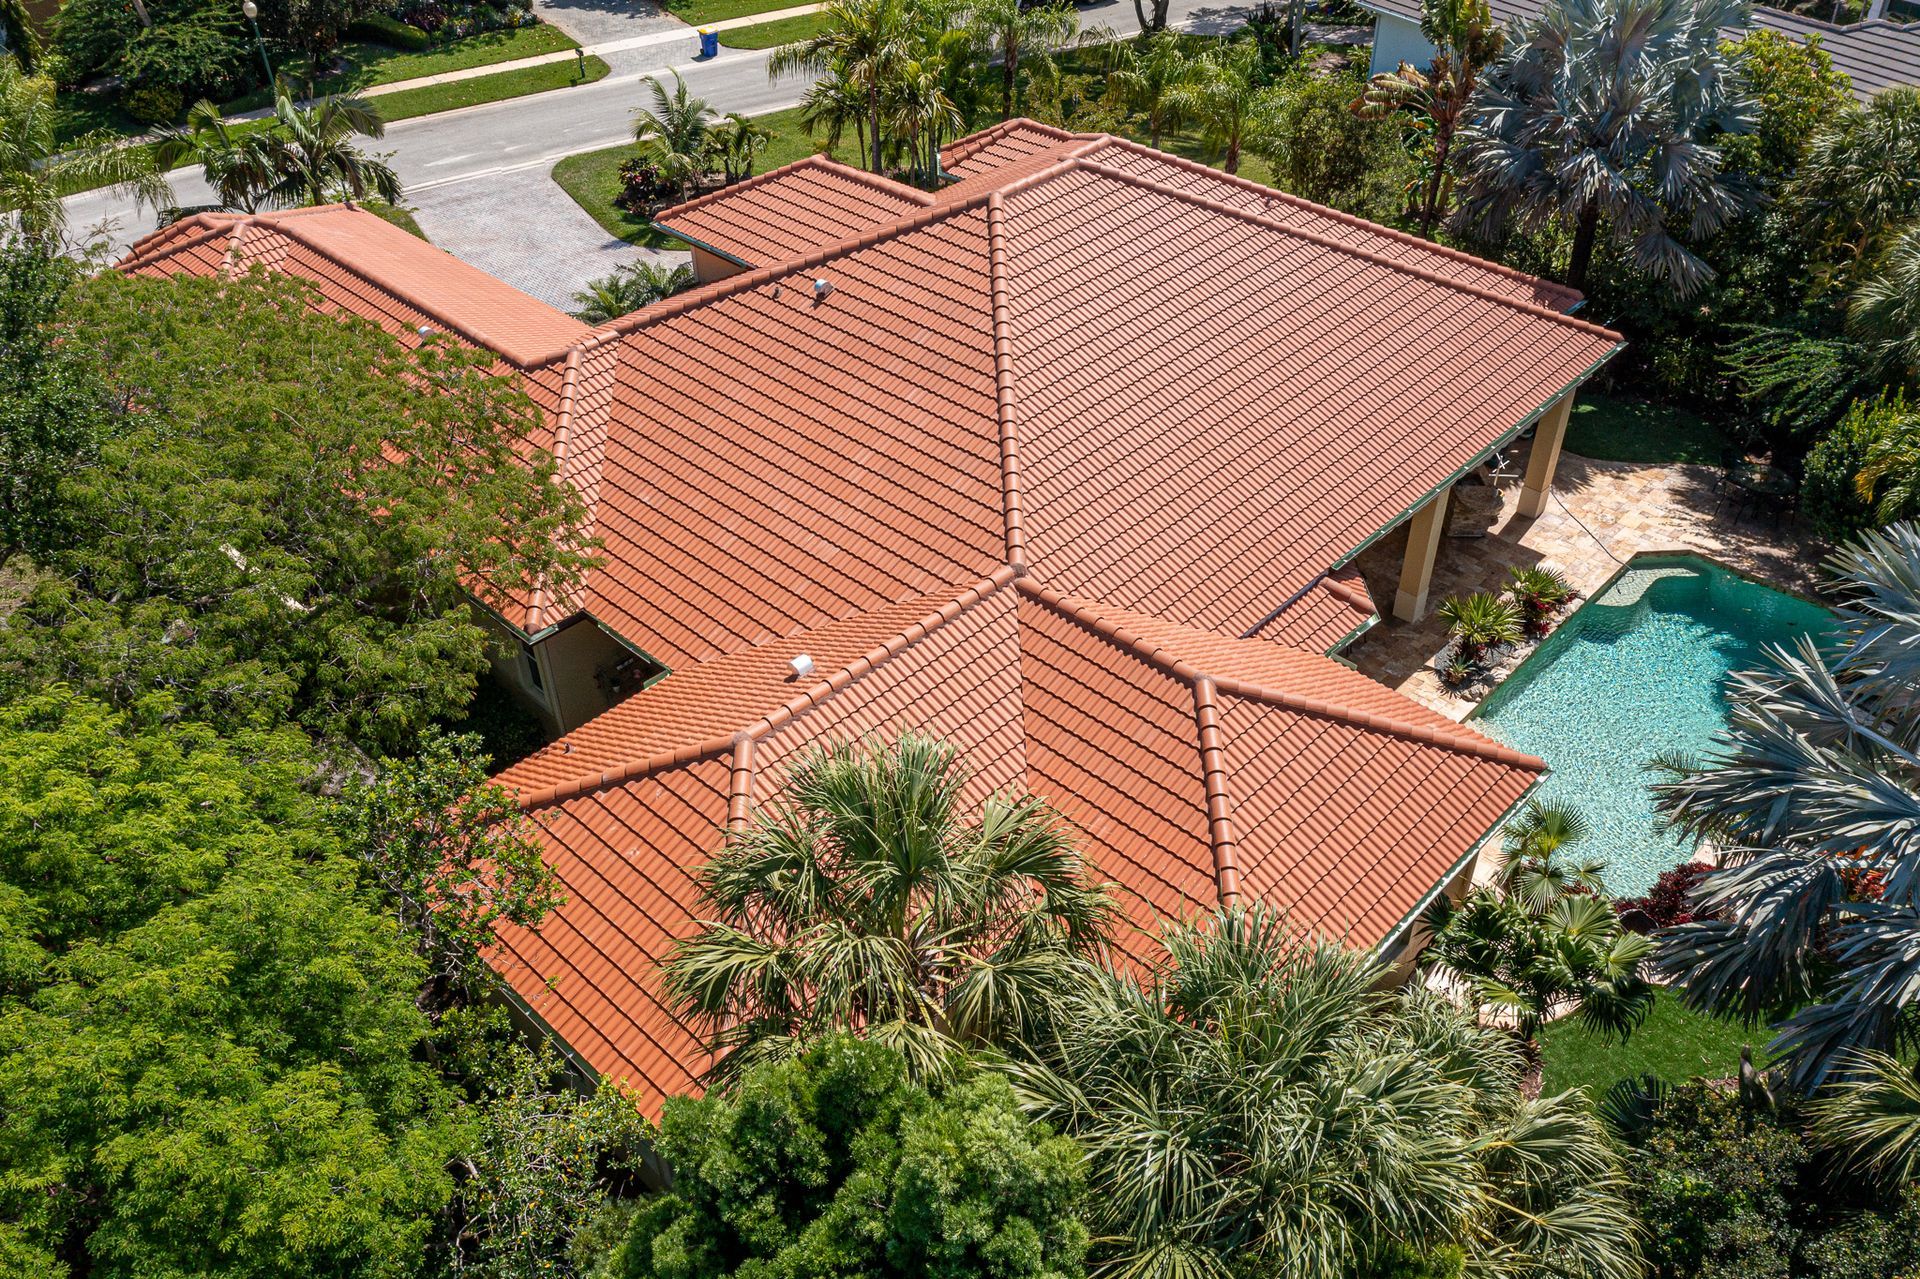 An aerial view of a house with a red tile roof and a pool surrounded by trees.